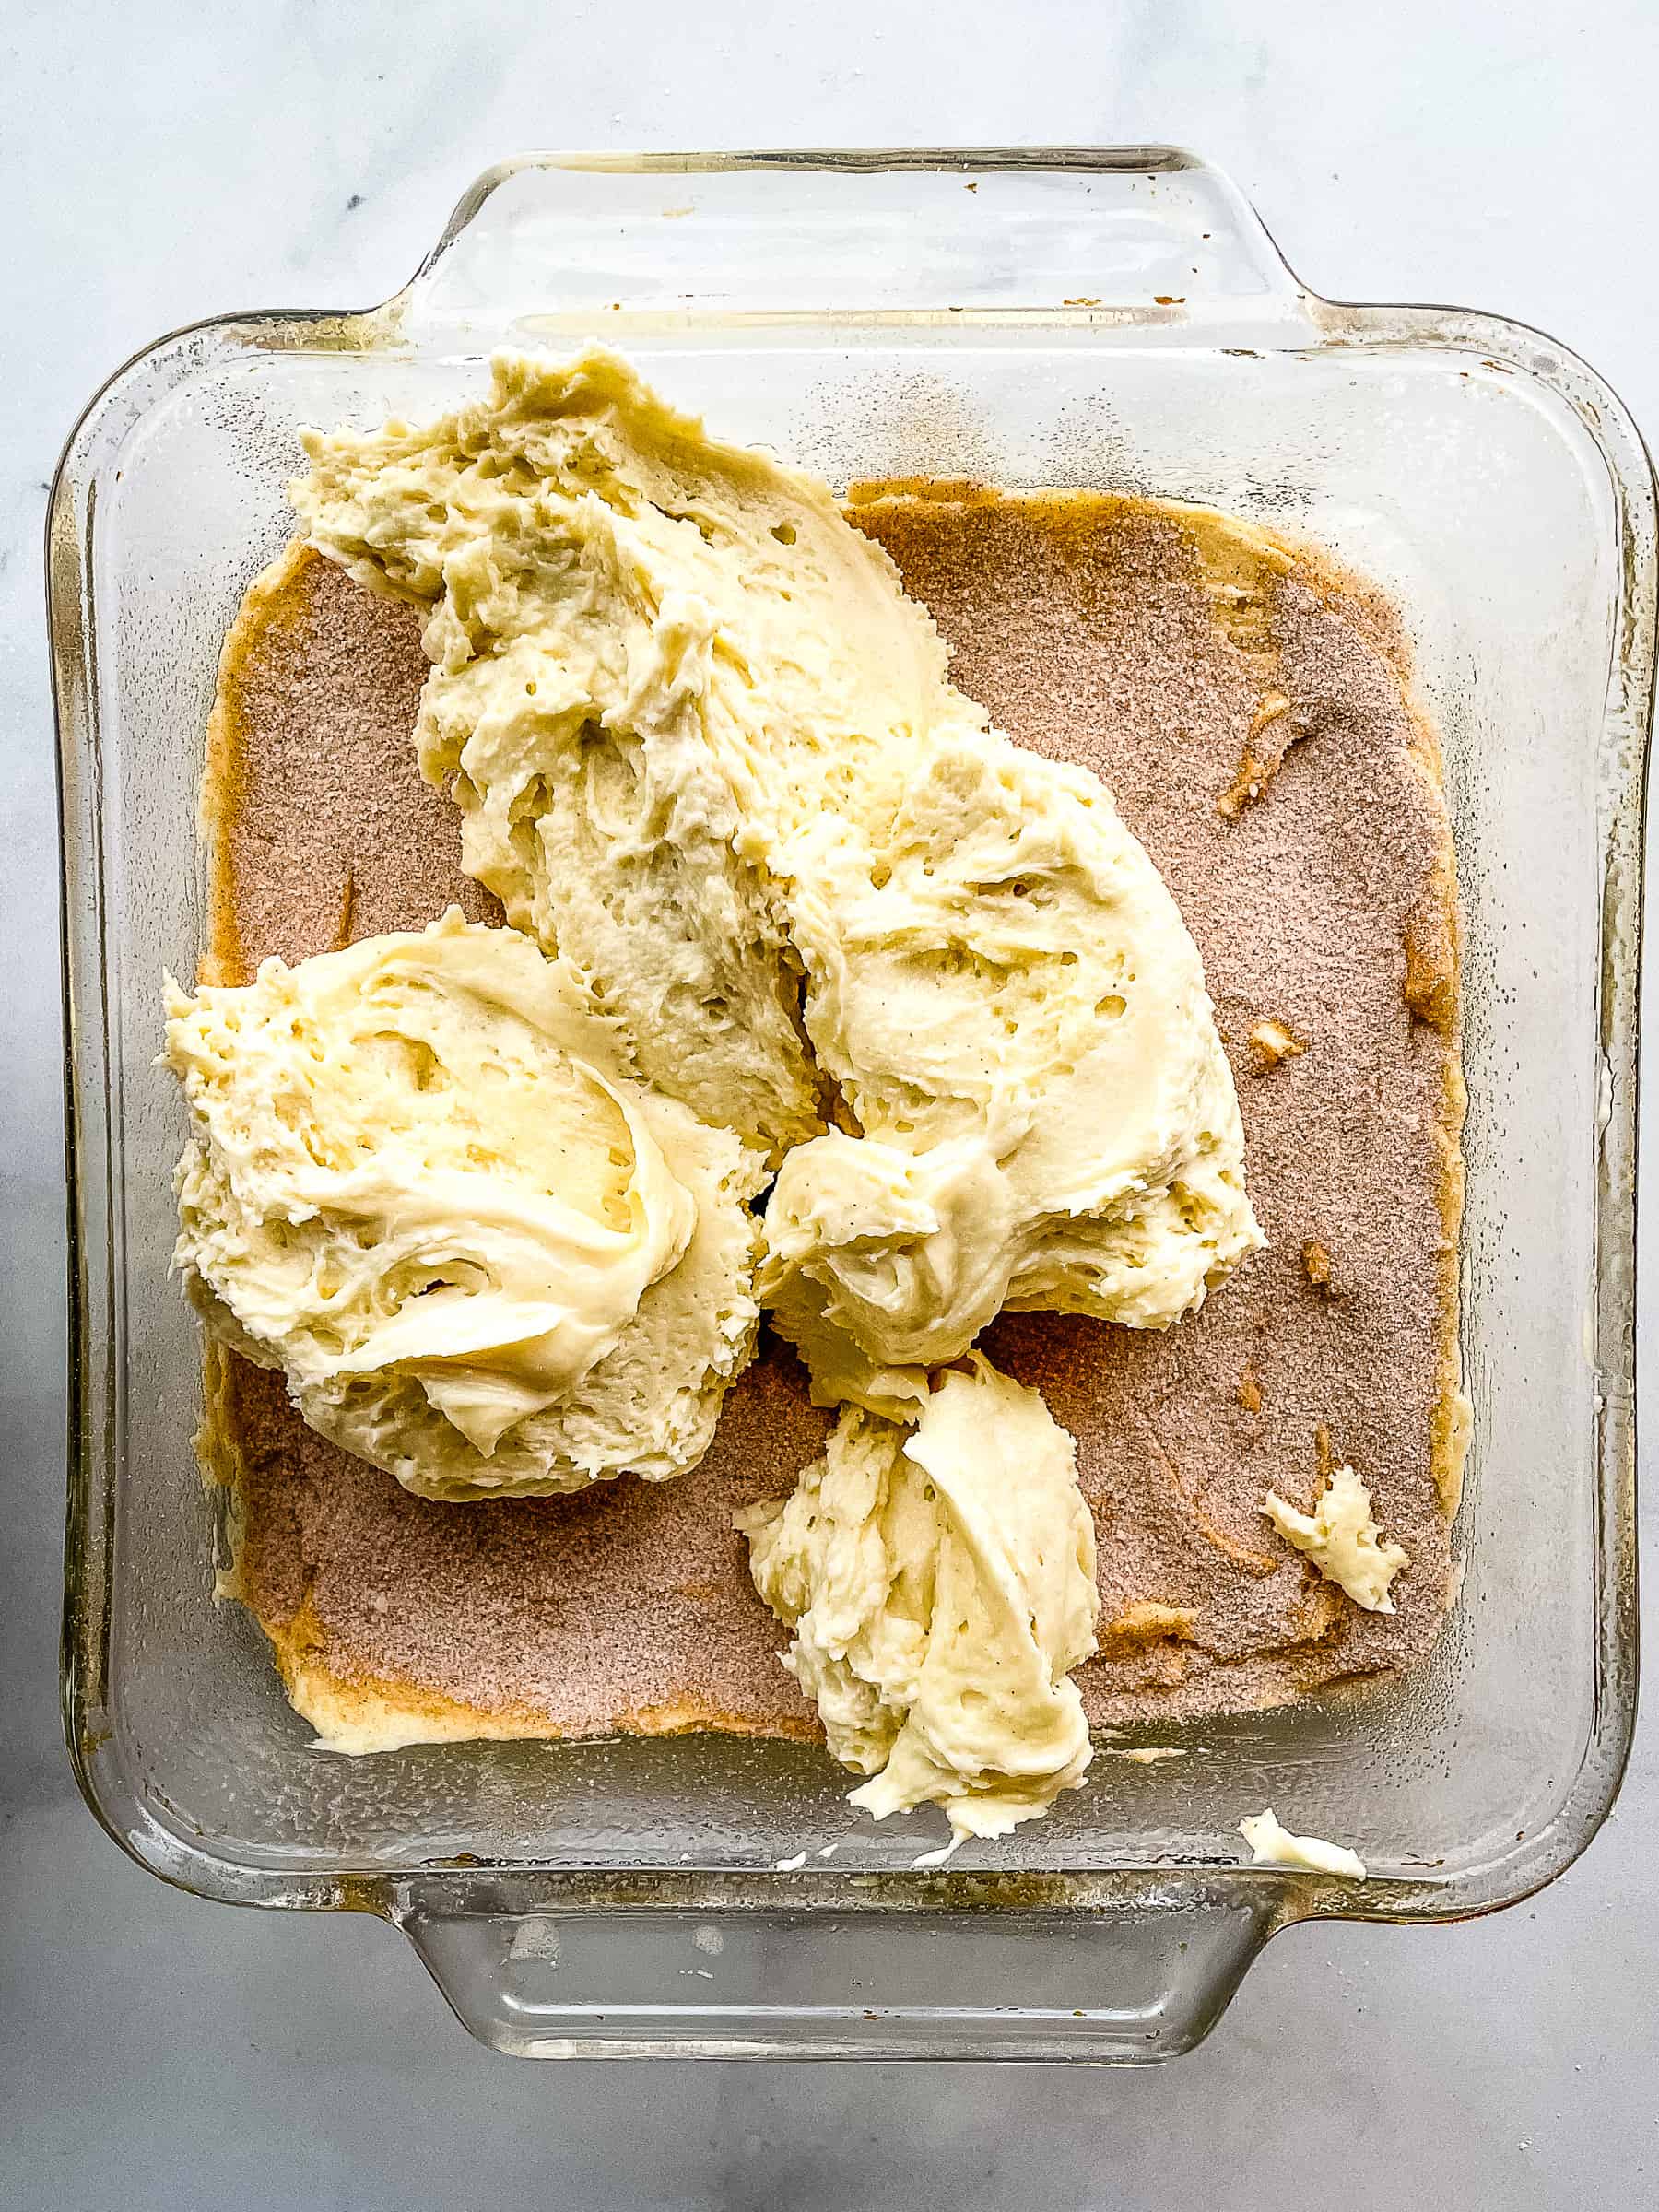 Gluten-free coffee cake batter in a pan with cinnamon sugar filling. A layer of batter is about to be spread over the filling.